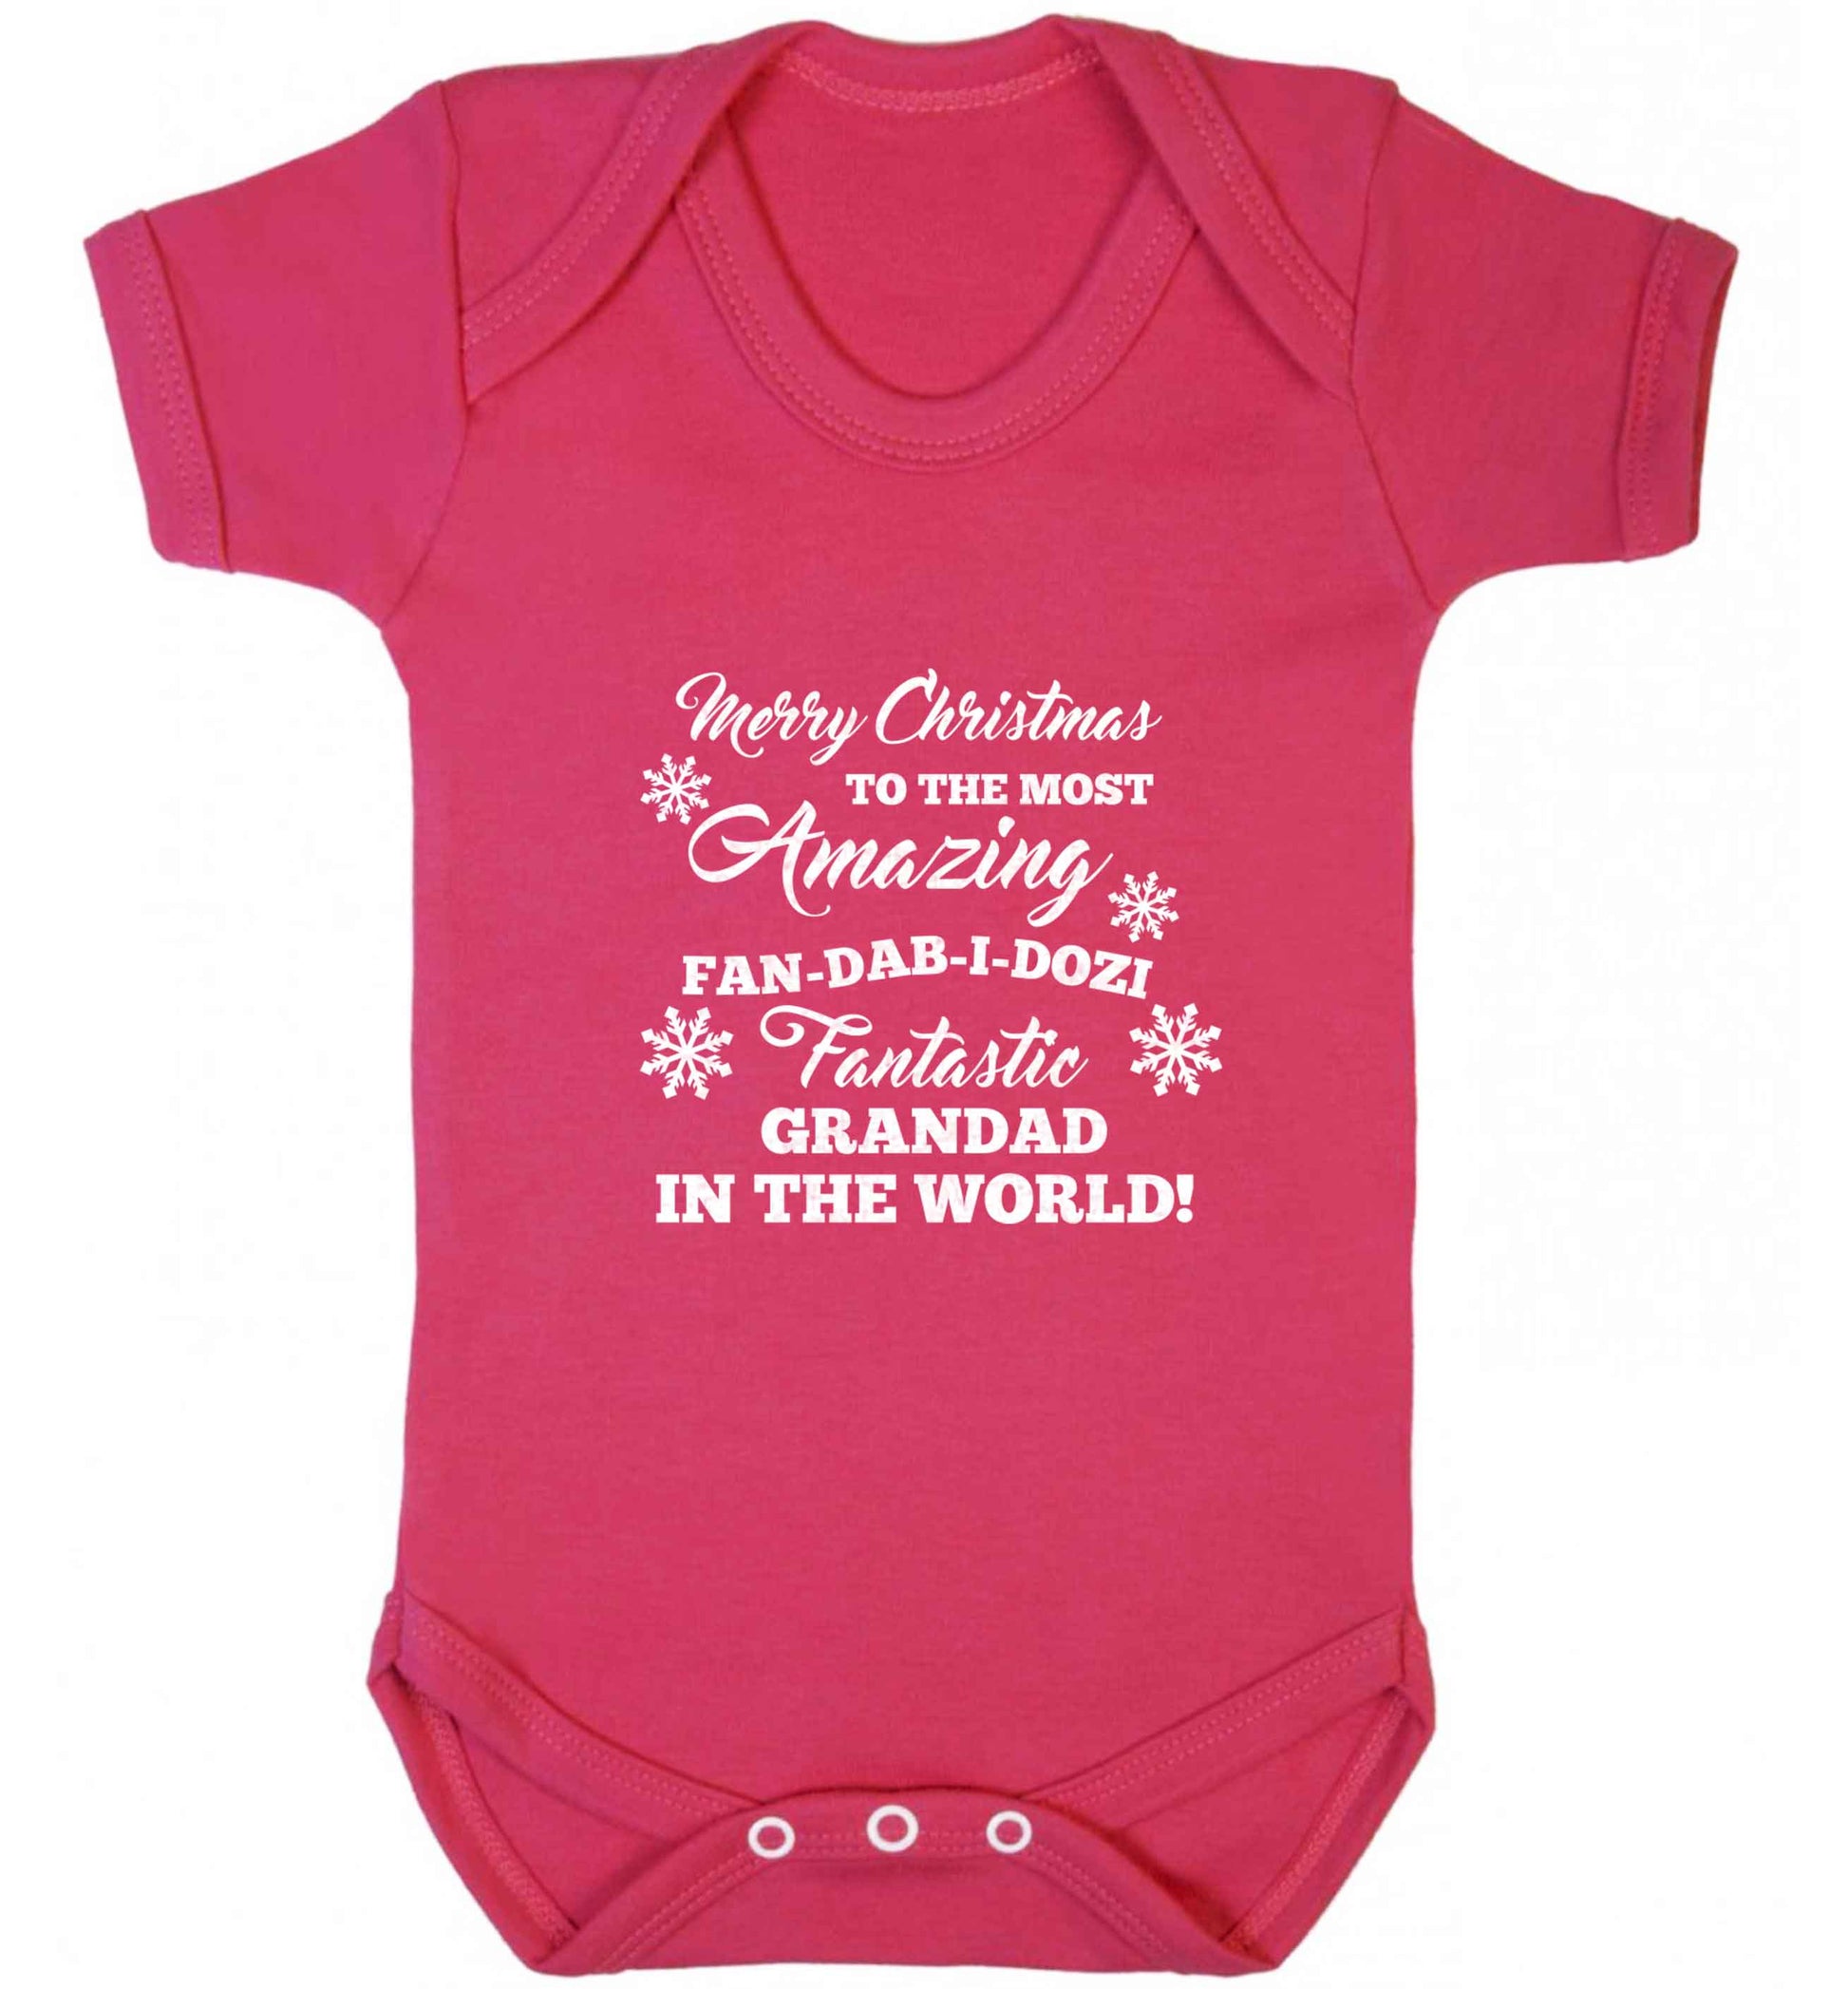 Merry Christmas to the most amazing fan-dab-i-dozi fantasic Grandad in the world baby vest dark pink 18-24 months